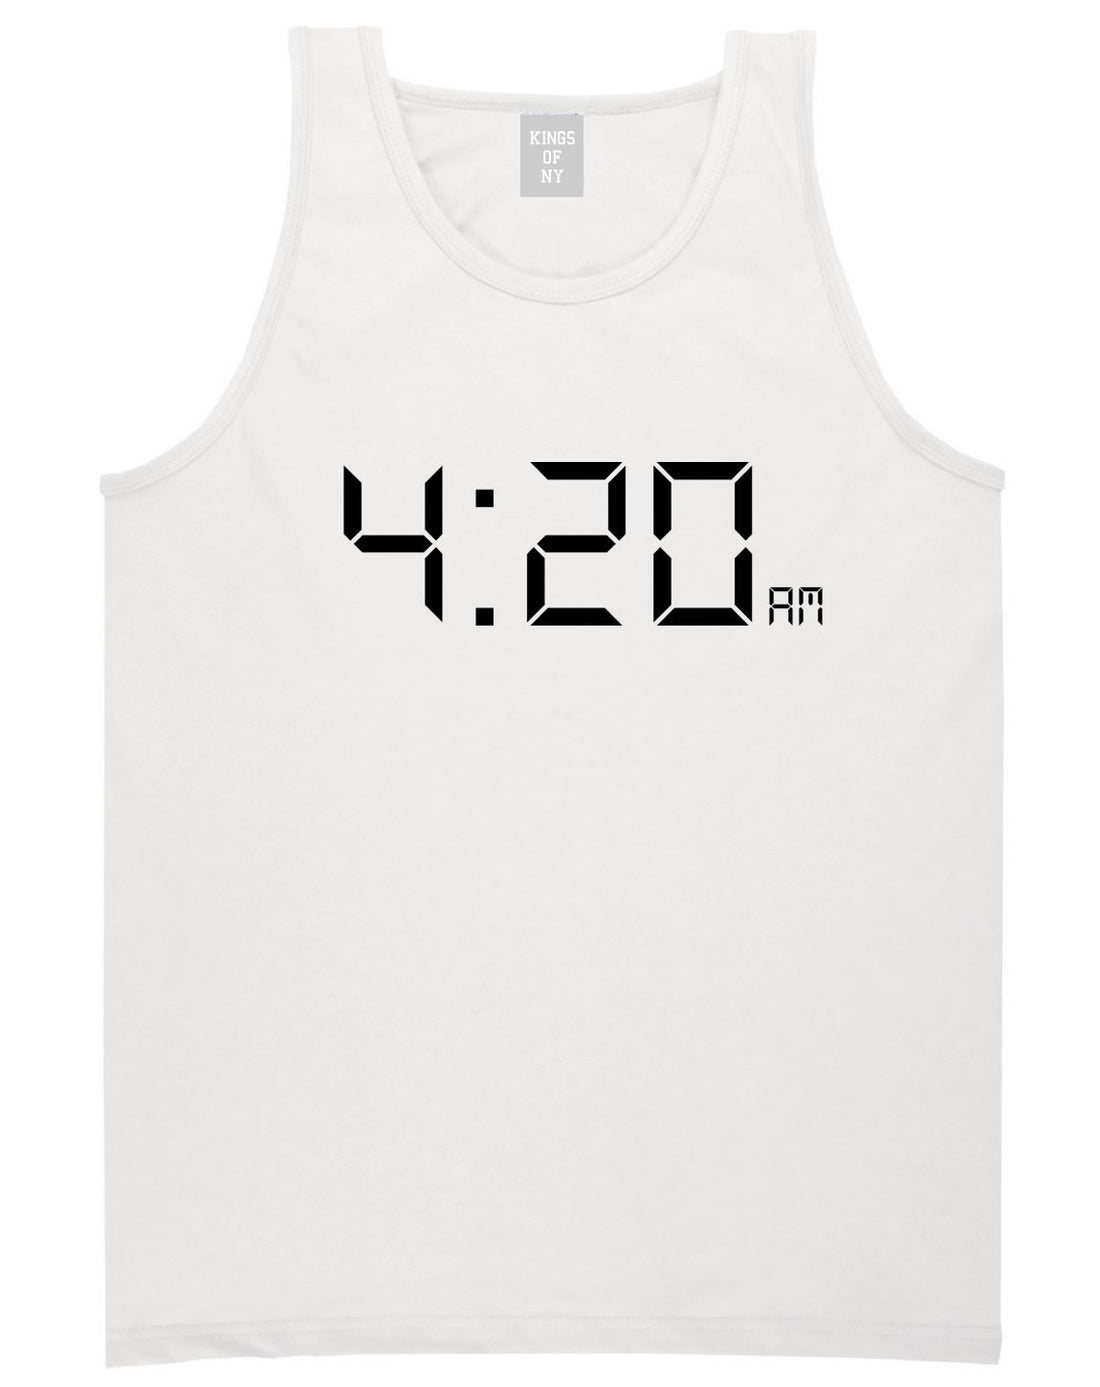 420 Time Weed Somker Tank Top in White By Kings Of NY